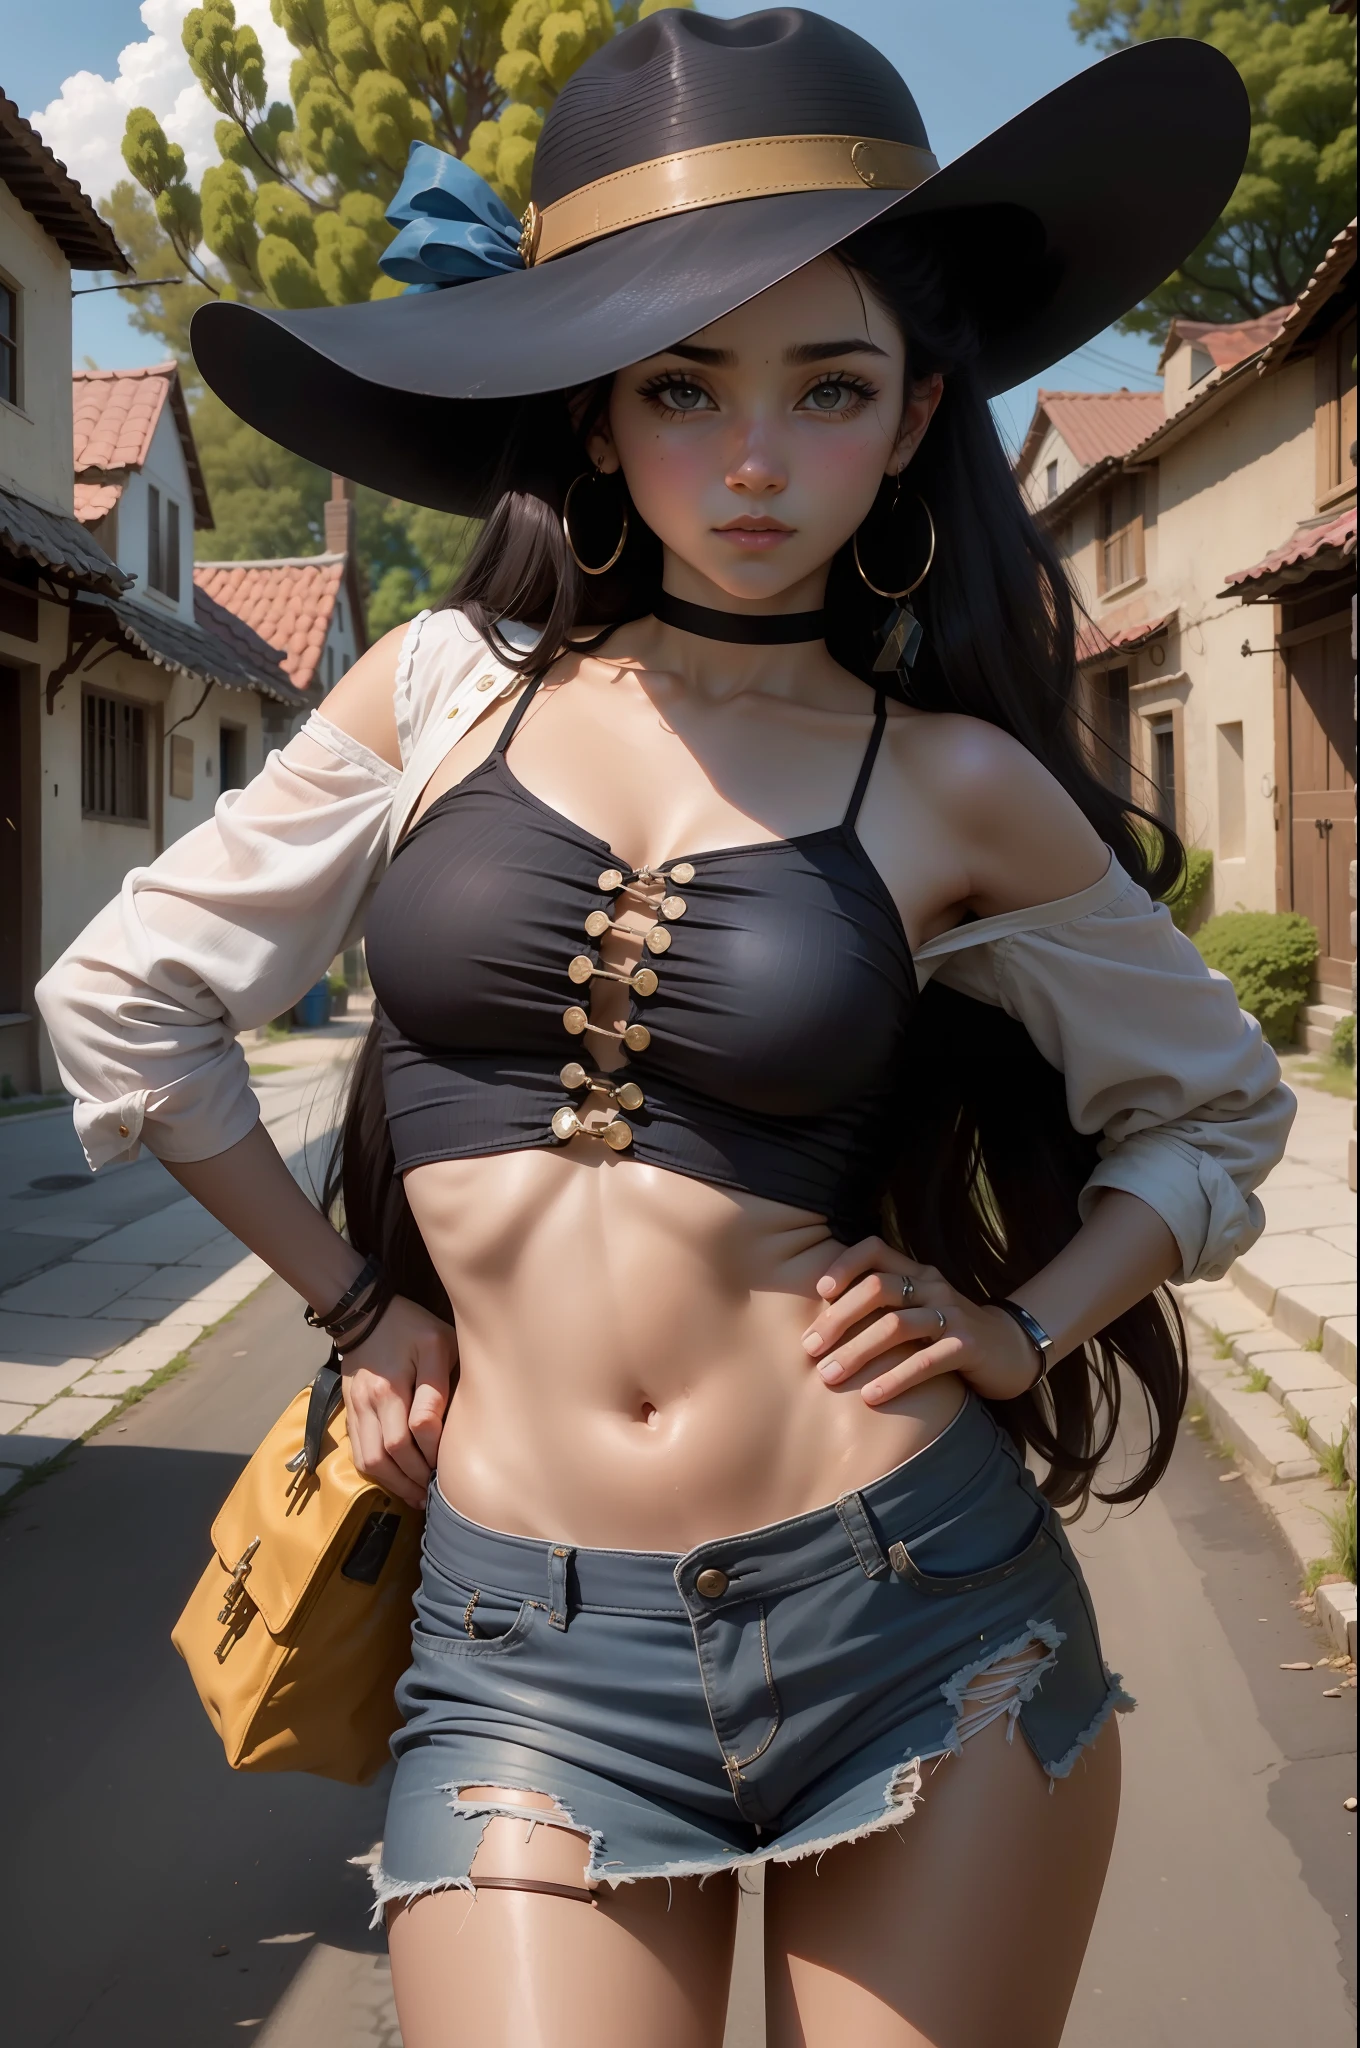 a beautiful cowgirl. She is in the middle of the street in a small village. She holds two large revolvers..., one in each hand, Wear denim clothing, a hat and high boots. Her hair is long and curly. It's a spectacular full-body image with a low upward tilt angle..